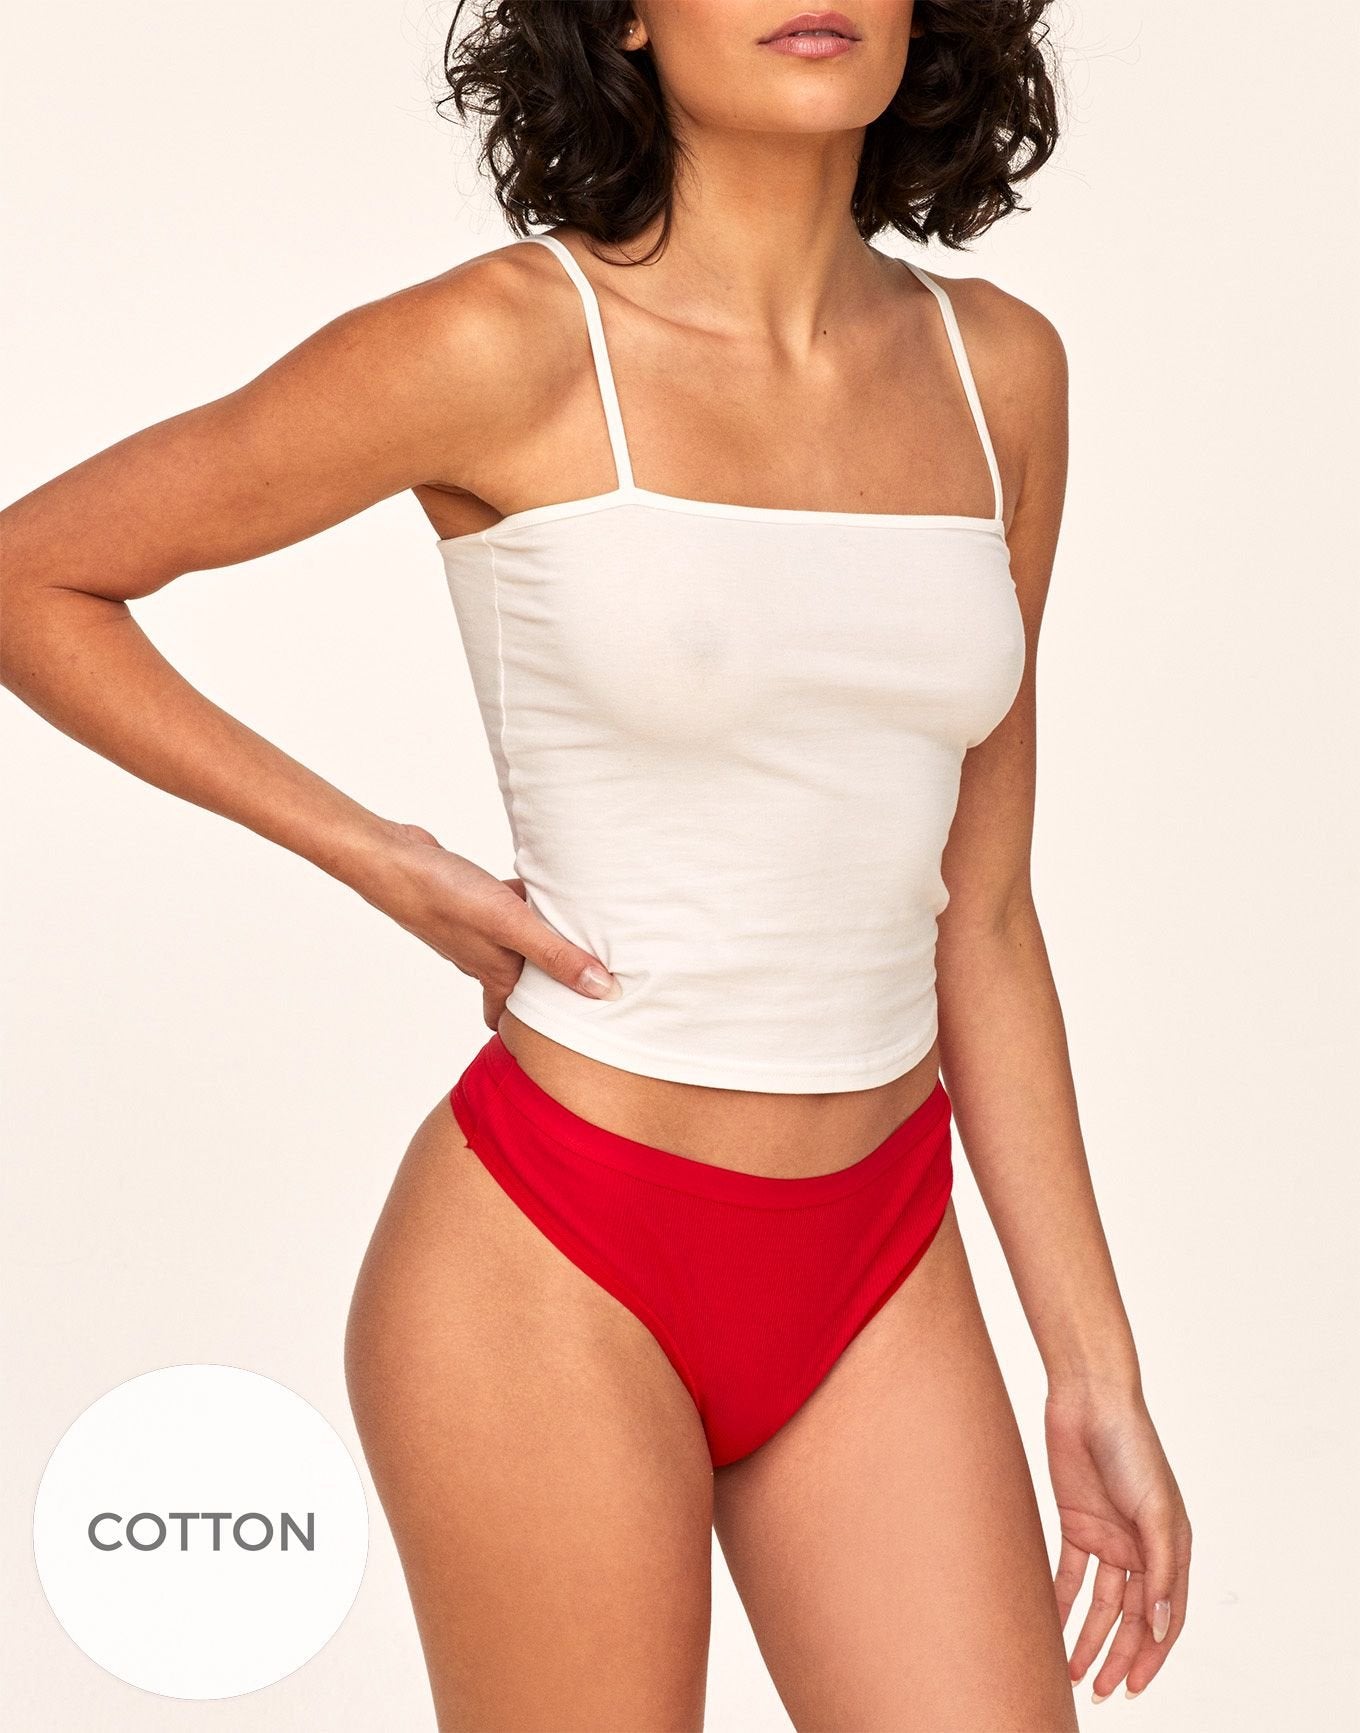 Adore Me Alexandra Ribbed Cotton Thong in color Red Pepper 3ET8 and shape thong